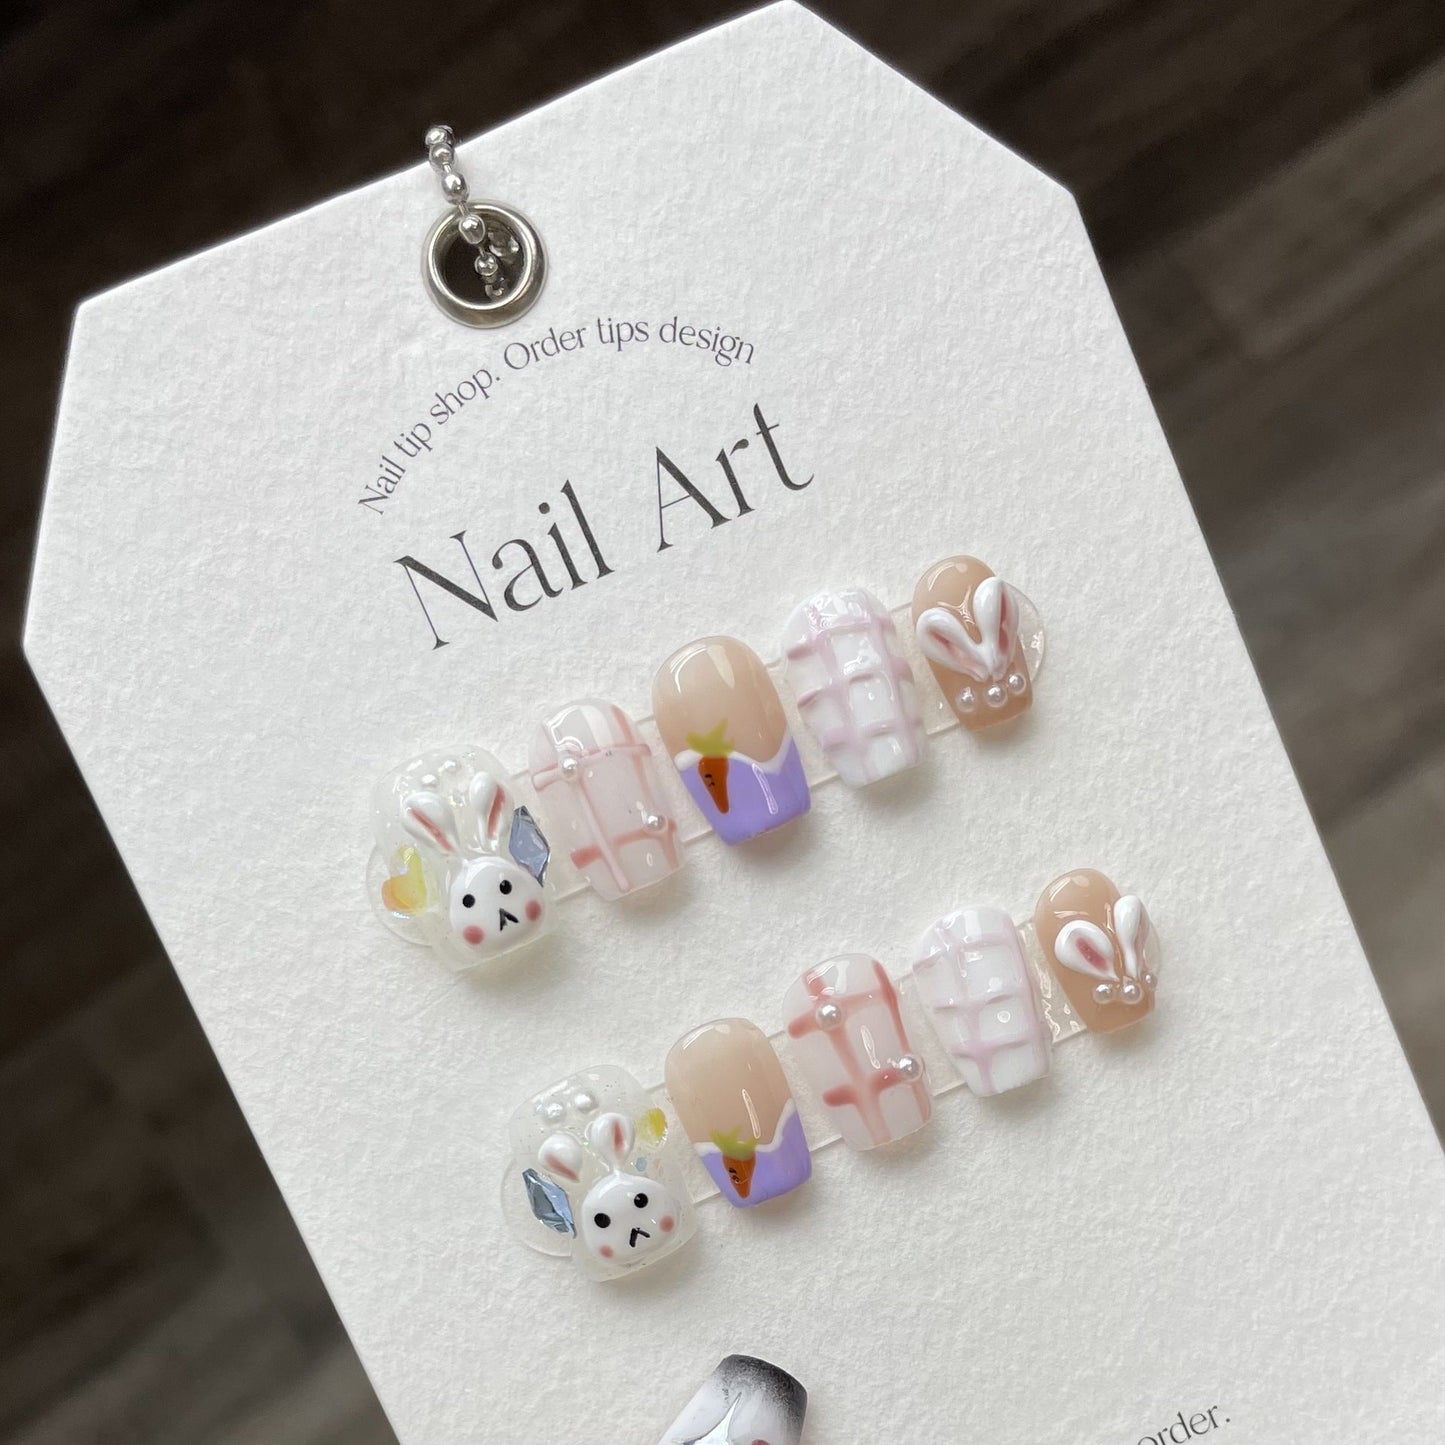 892 Hand drawn rabbit style press on nails 100% handmade false nails nude color white